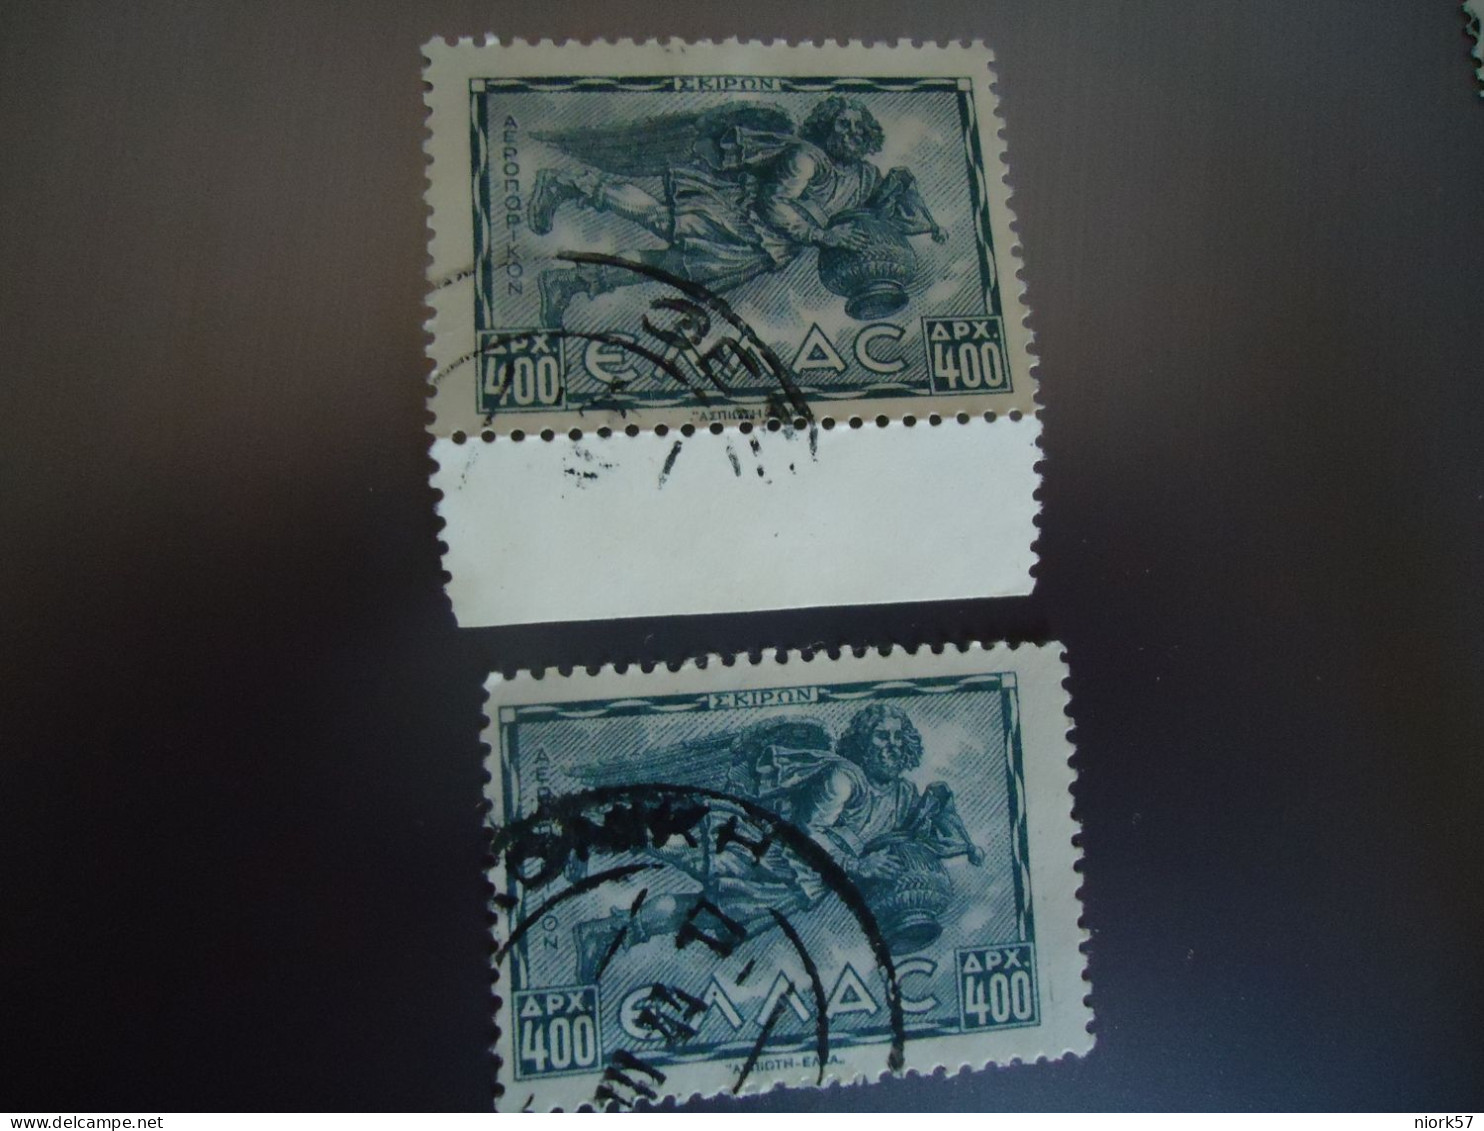 GREECE  USED  2  STAMPS  1943  AIR WINDS - Automatenmarken [ATM]